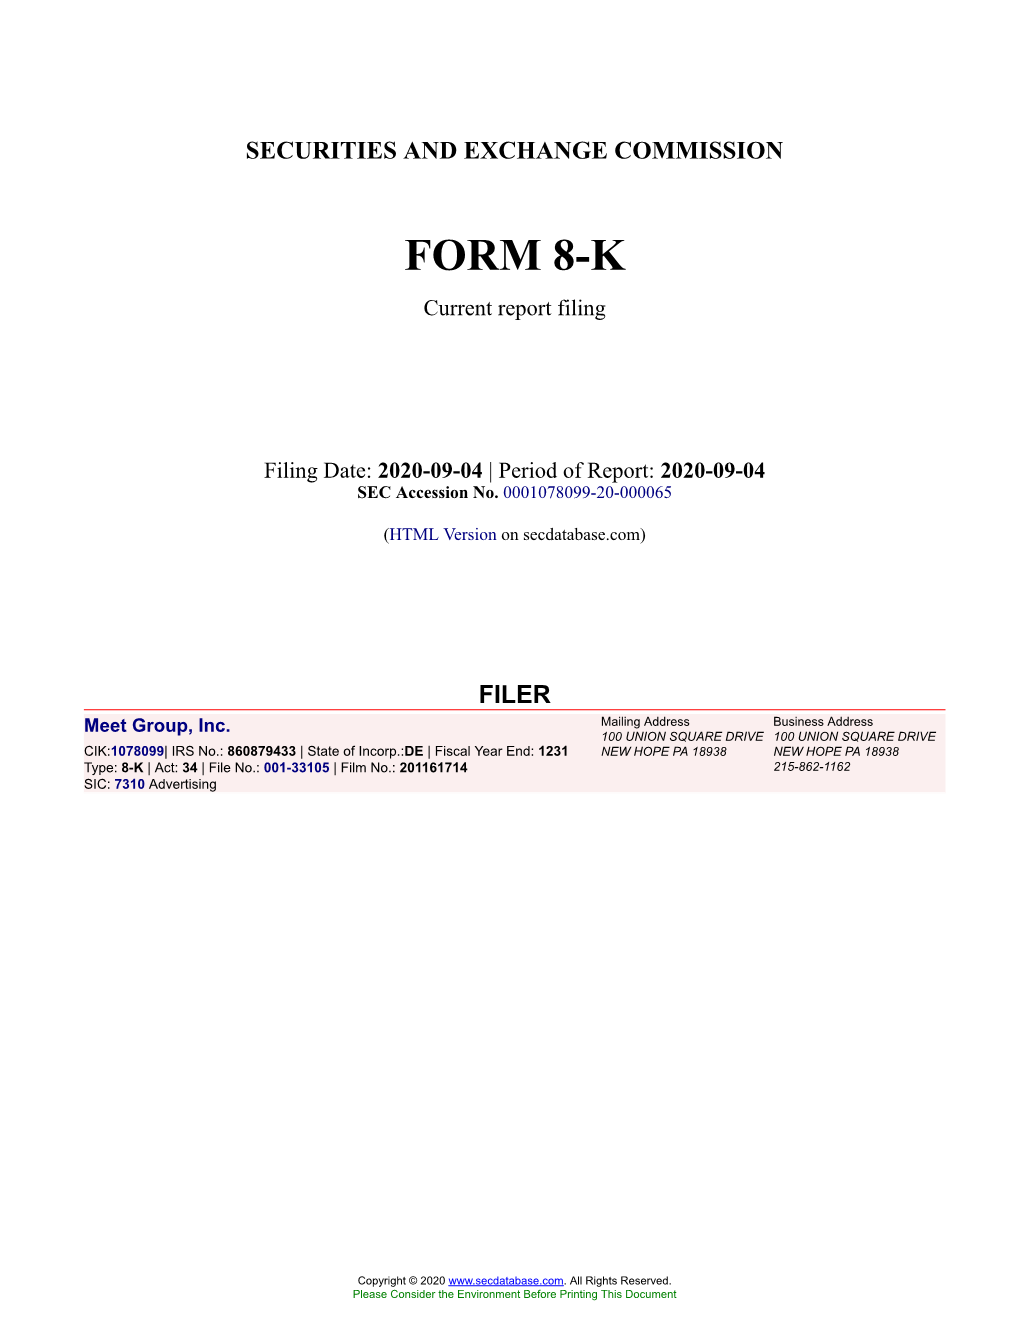 Meet Group, Inc. Form 8-K Current Event Report Filed 2020-09-04